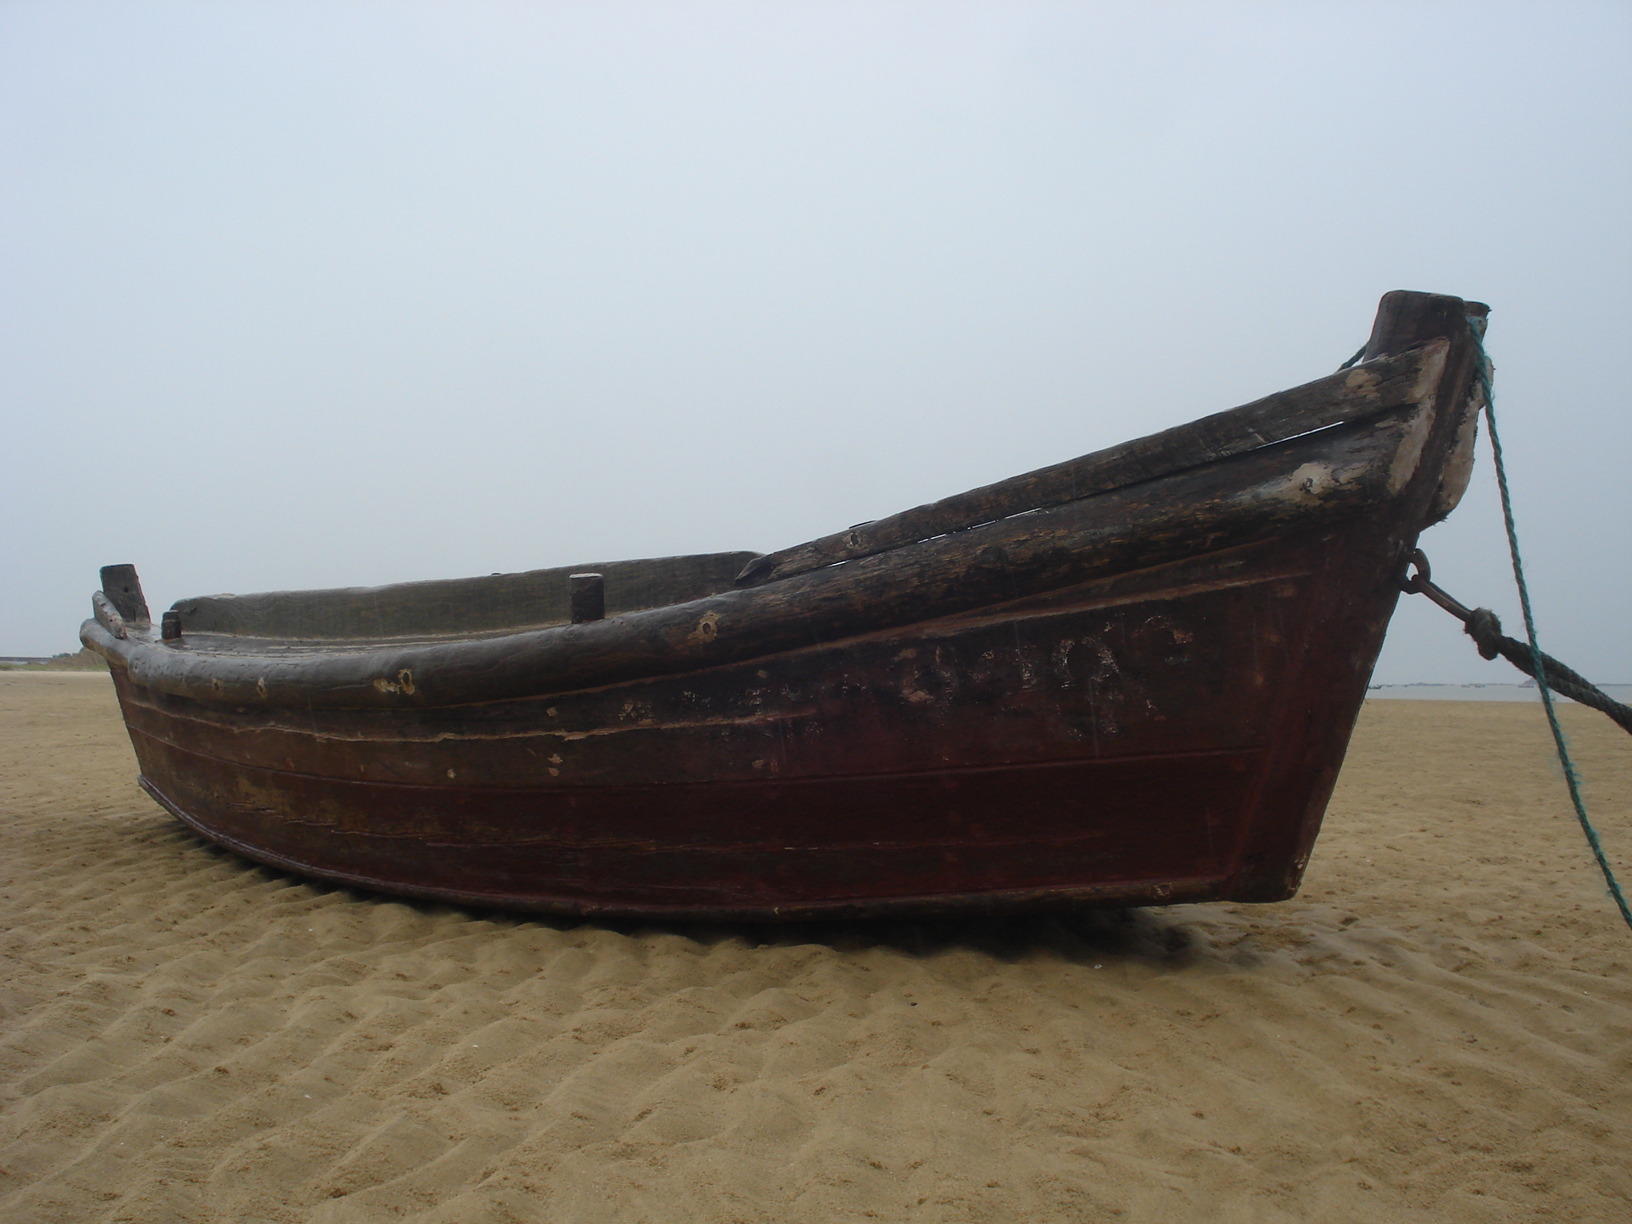 a rusted up boat laying in the sand on the beach